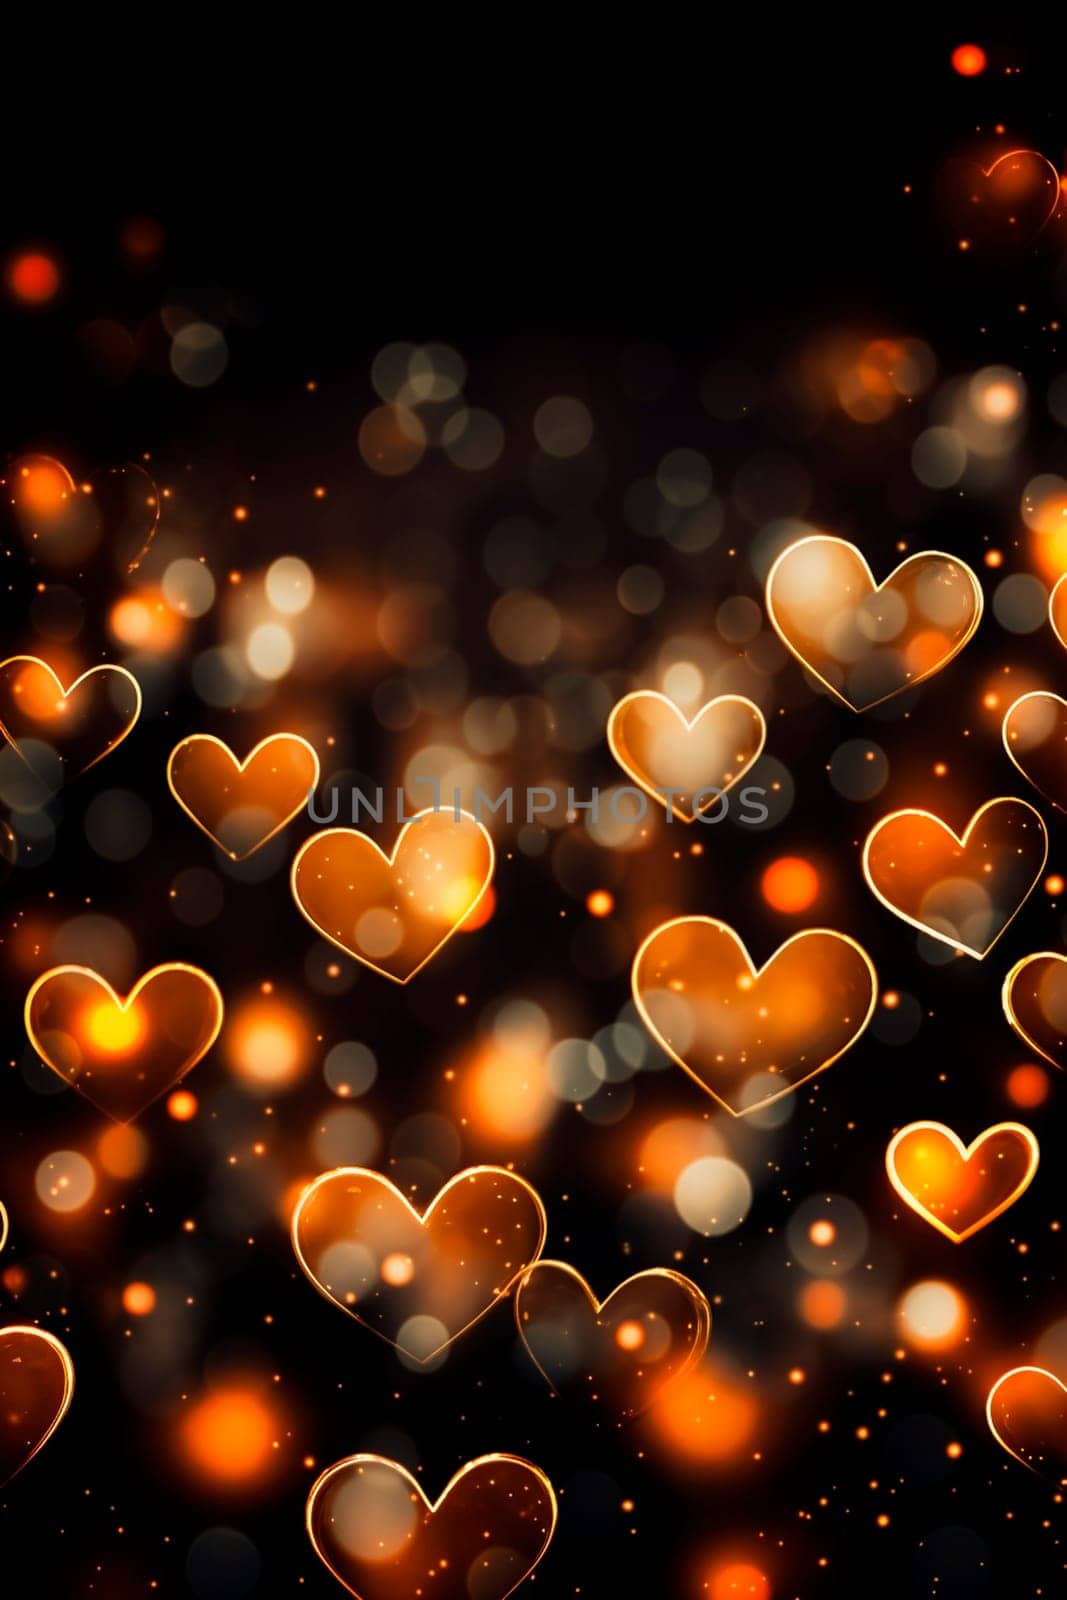 Golden bokeh hearts on a black background. Selective focus. Holiday.